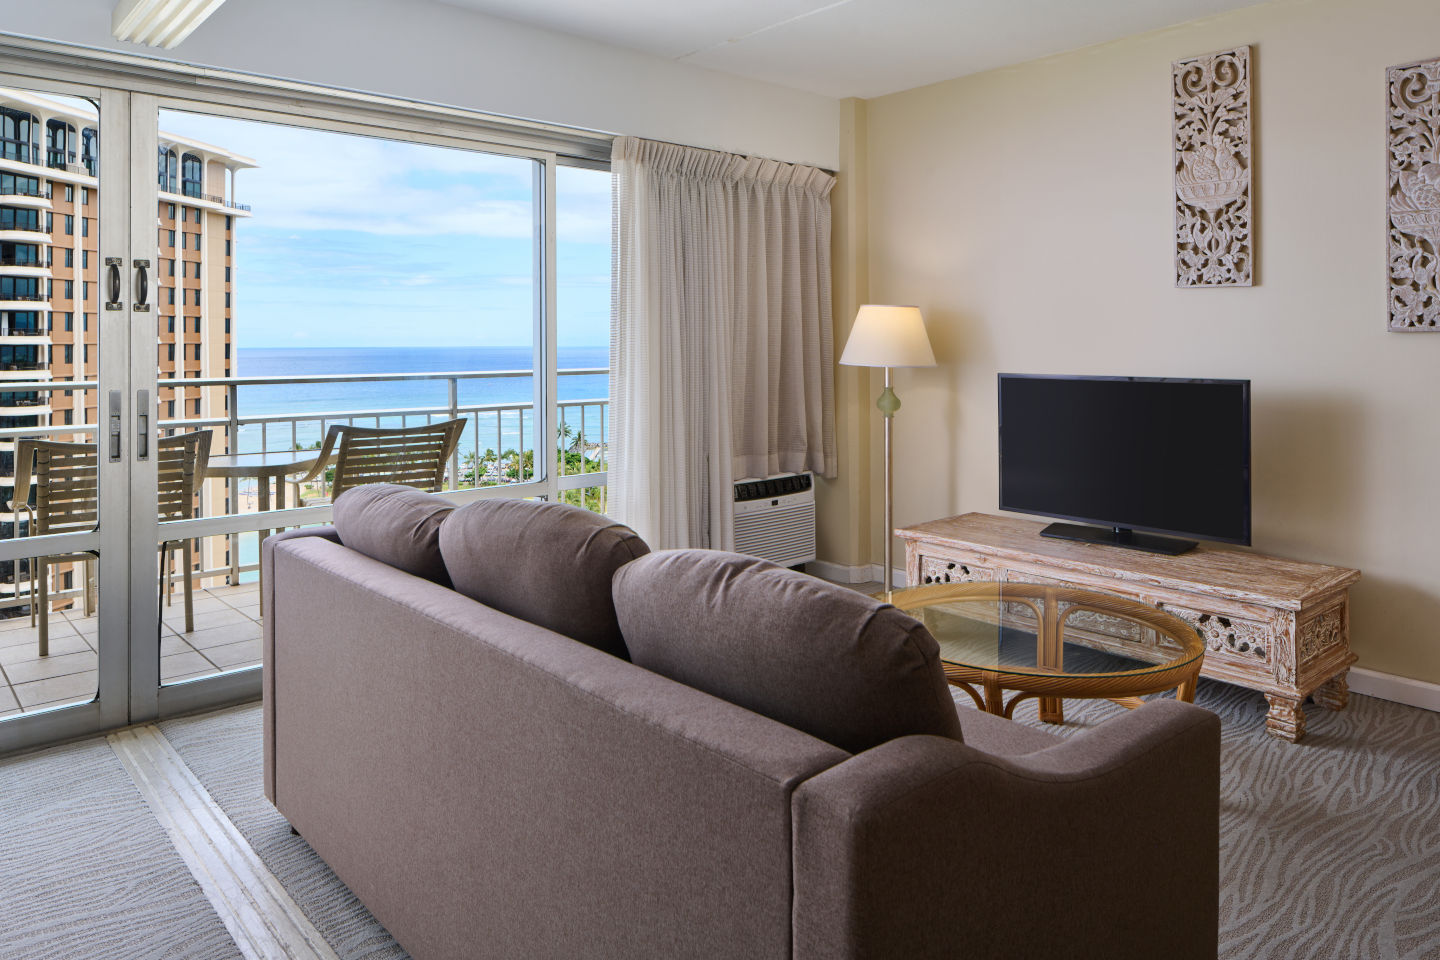 Ilikai Lite Ocean View Suite with Full Kitchen living area with a private balcony and seating area